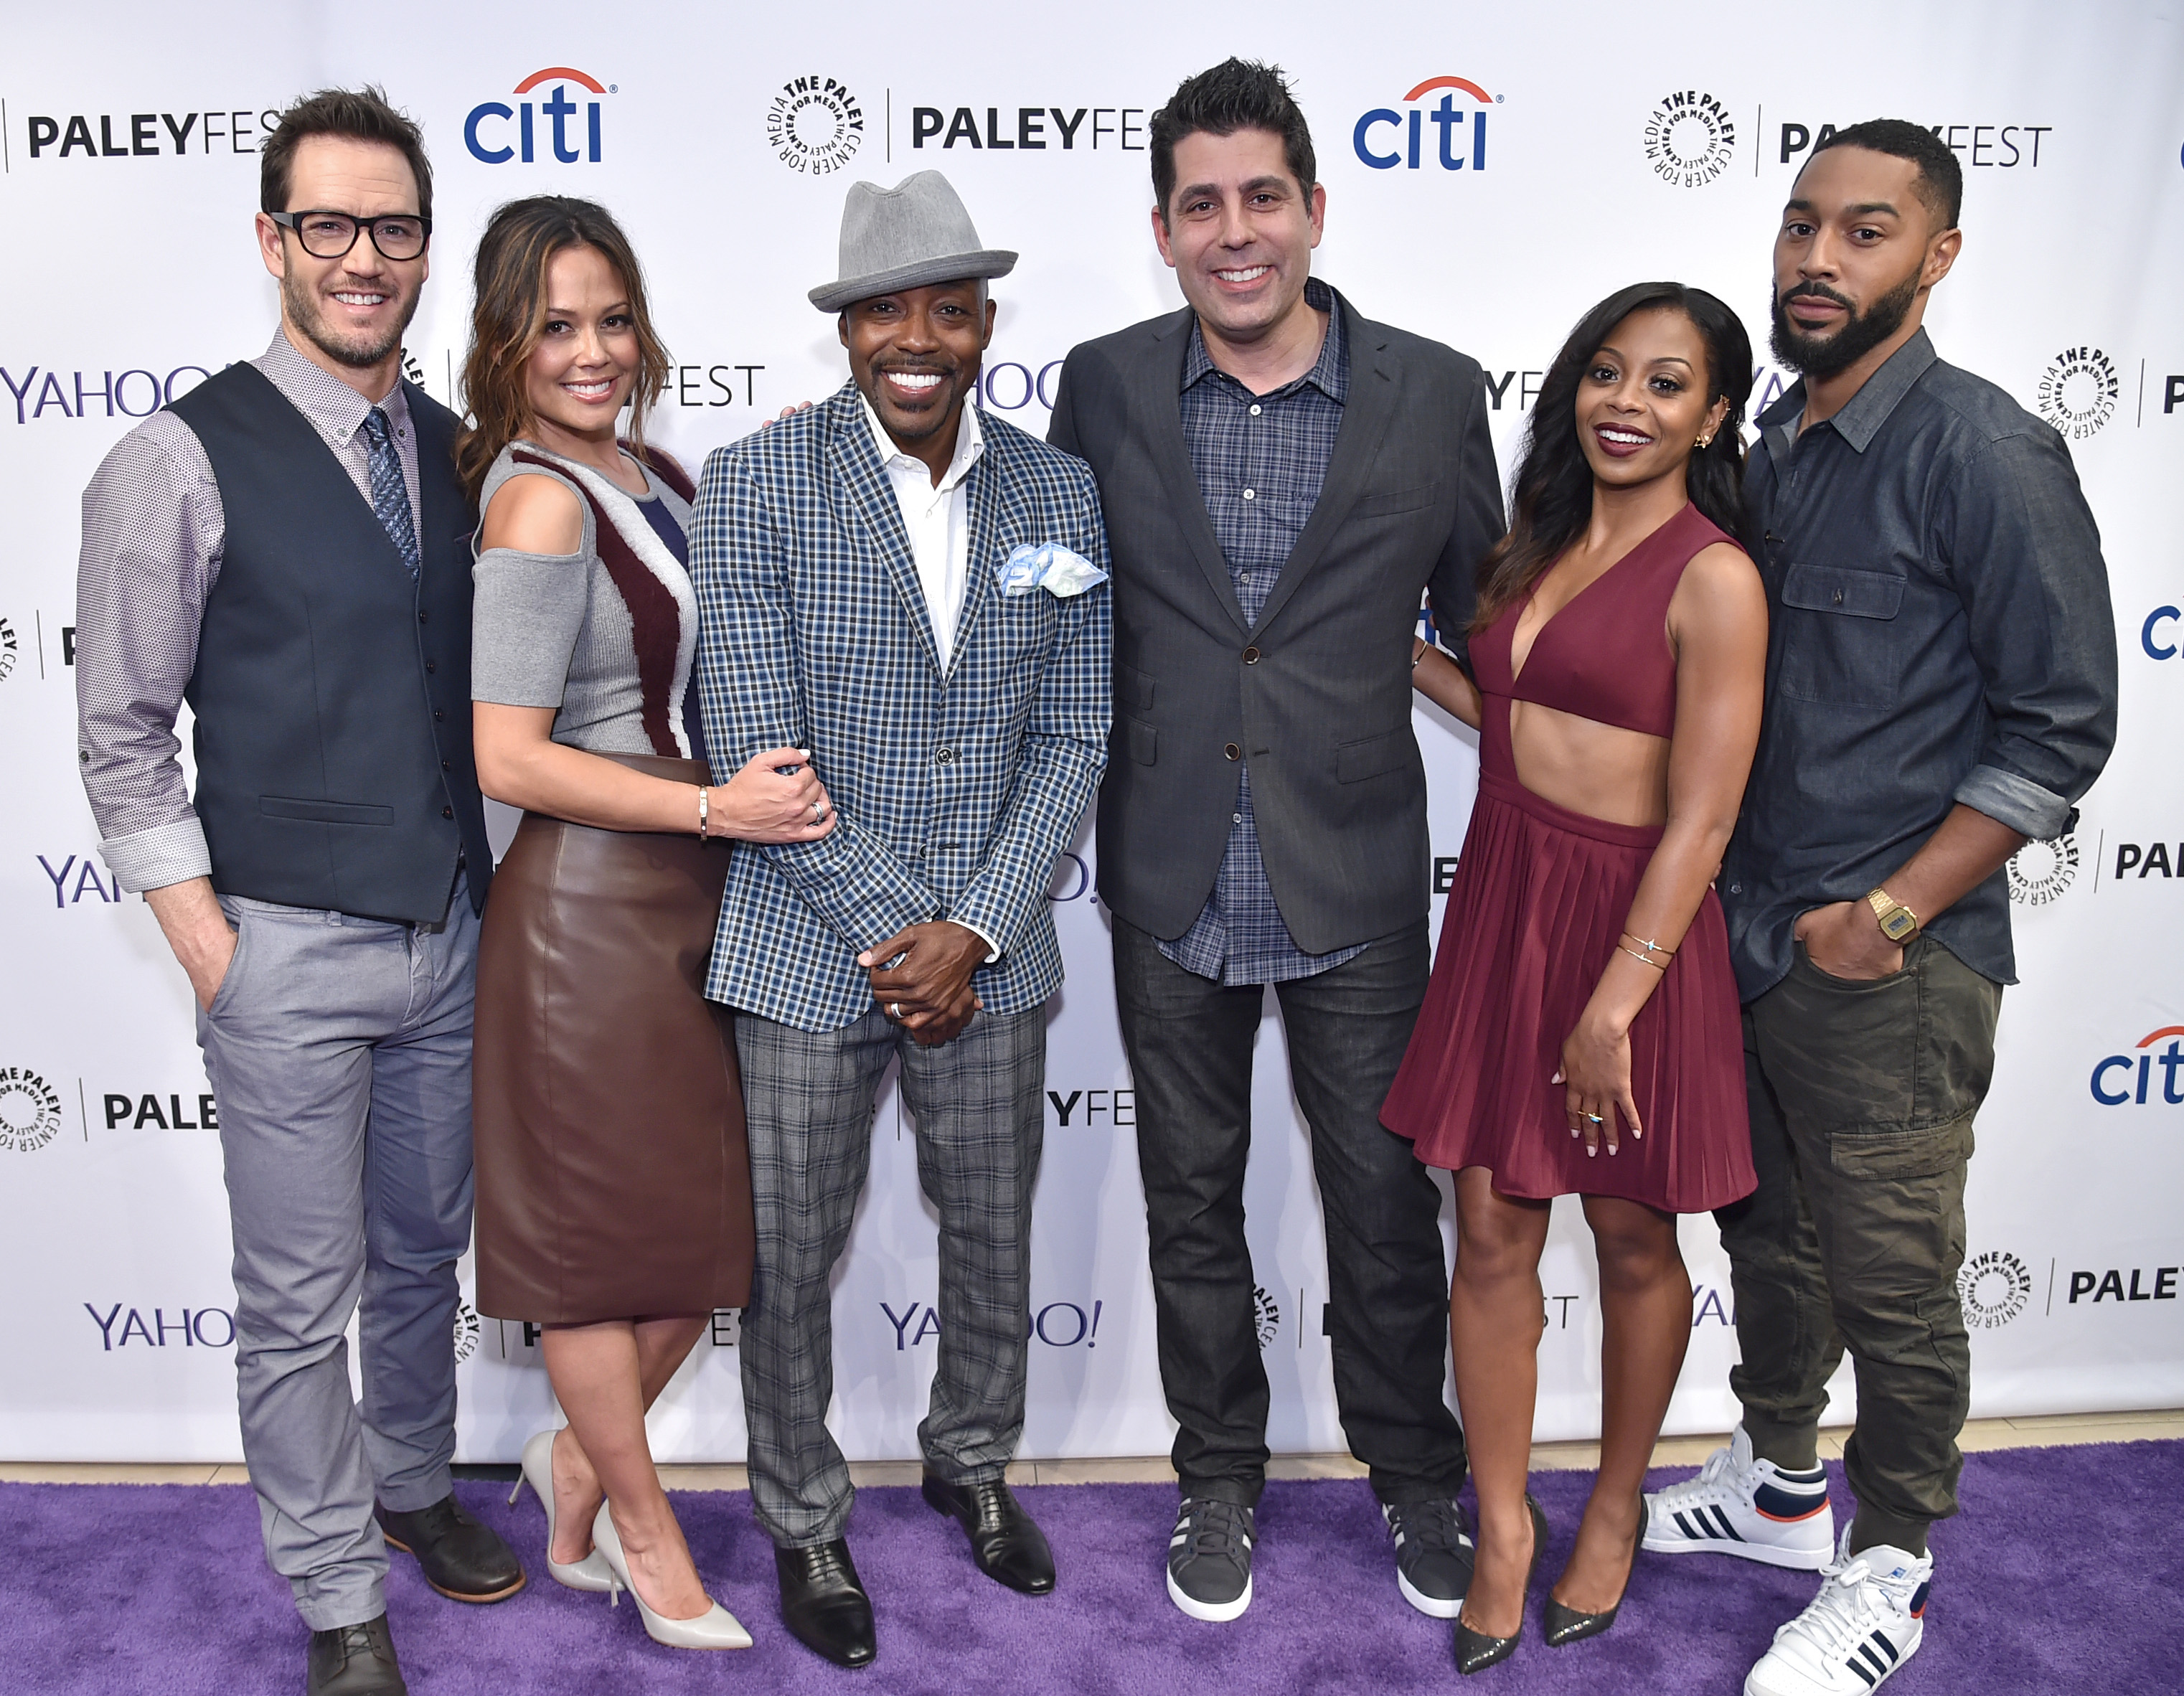 PALEYFEST FALL TV PREVIEW KICKS OFF IN LOS ANGELES